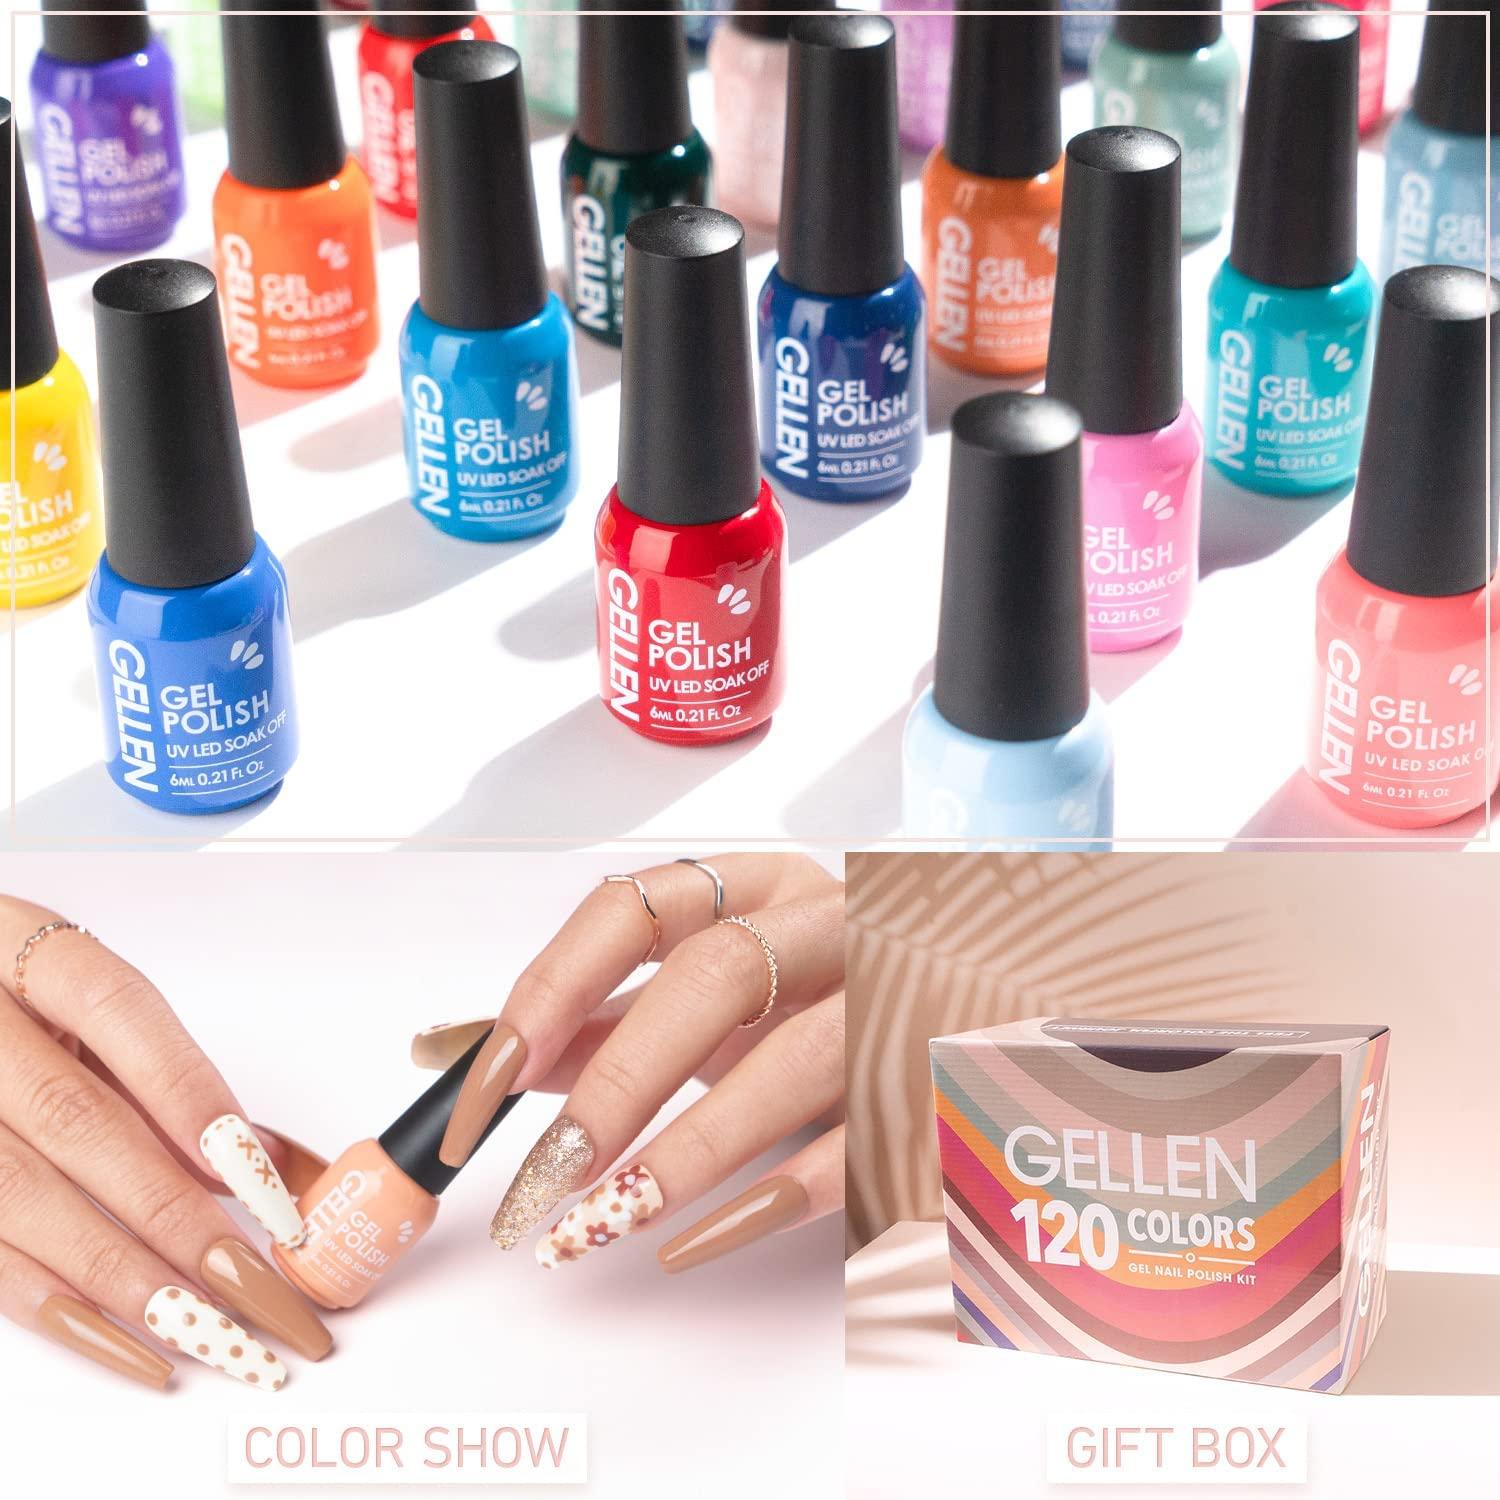 17 Best of British Nail Art Kit - Review | The Sunday Girl